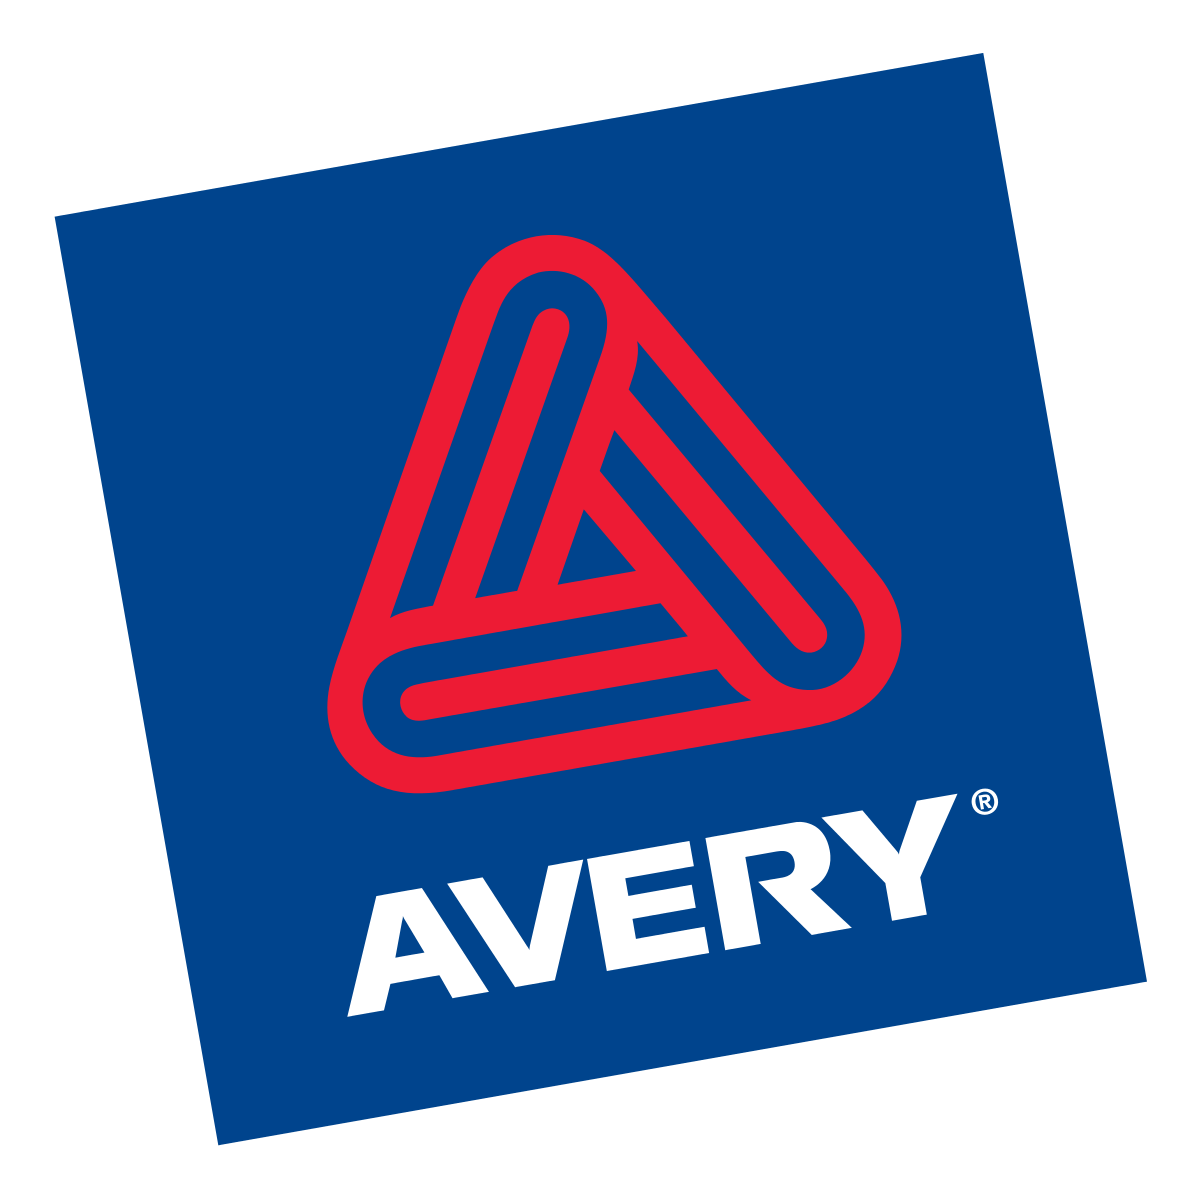 Avery Dennison PNG, Avery Dennison-Plu (97.83 Kb) Free PNG | HDPng